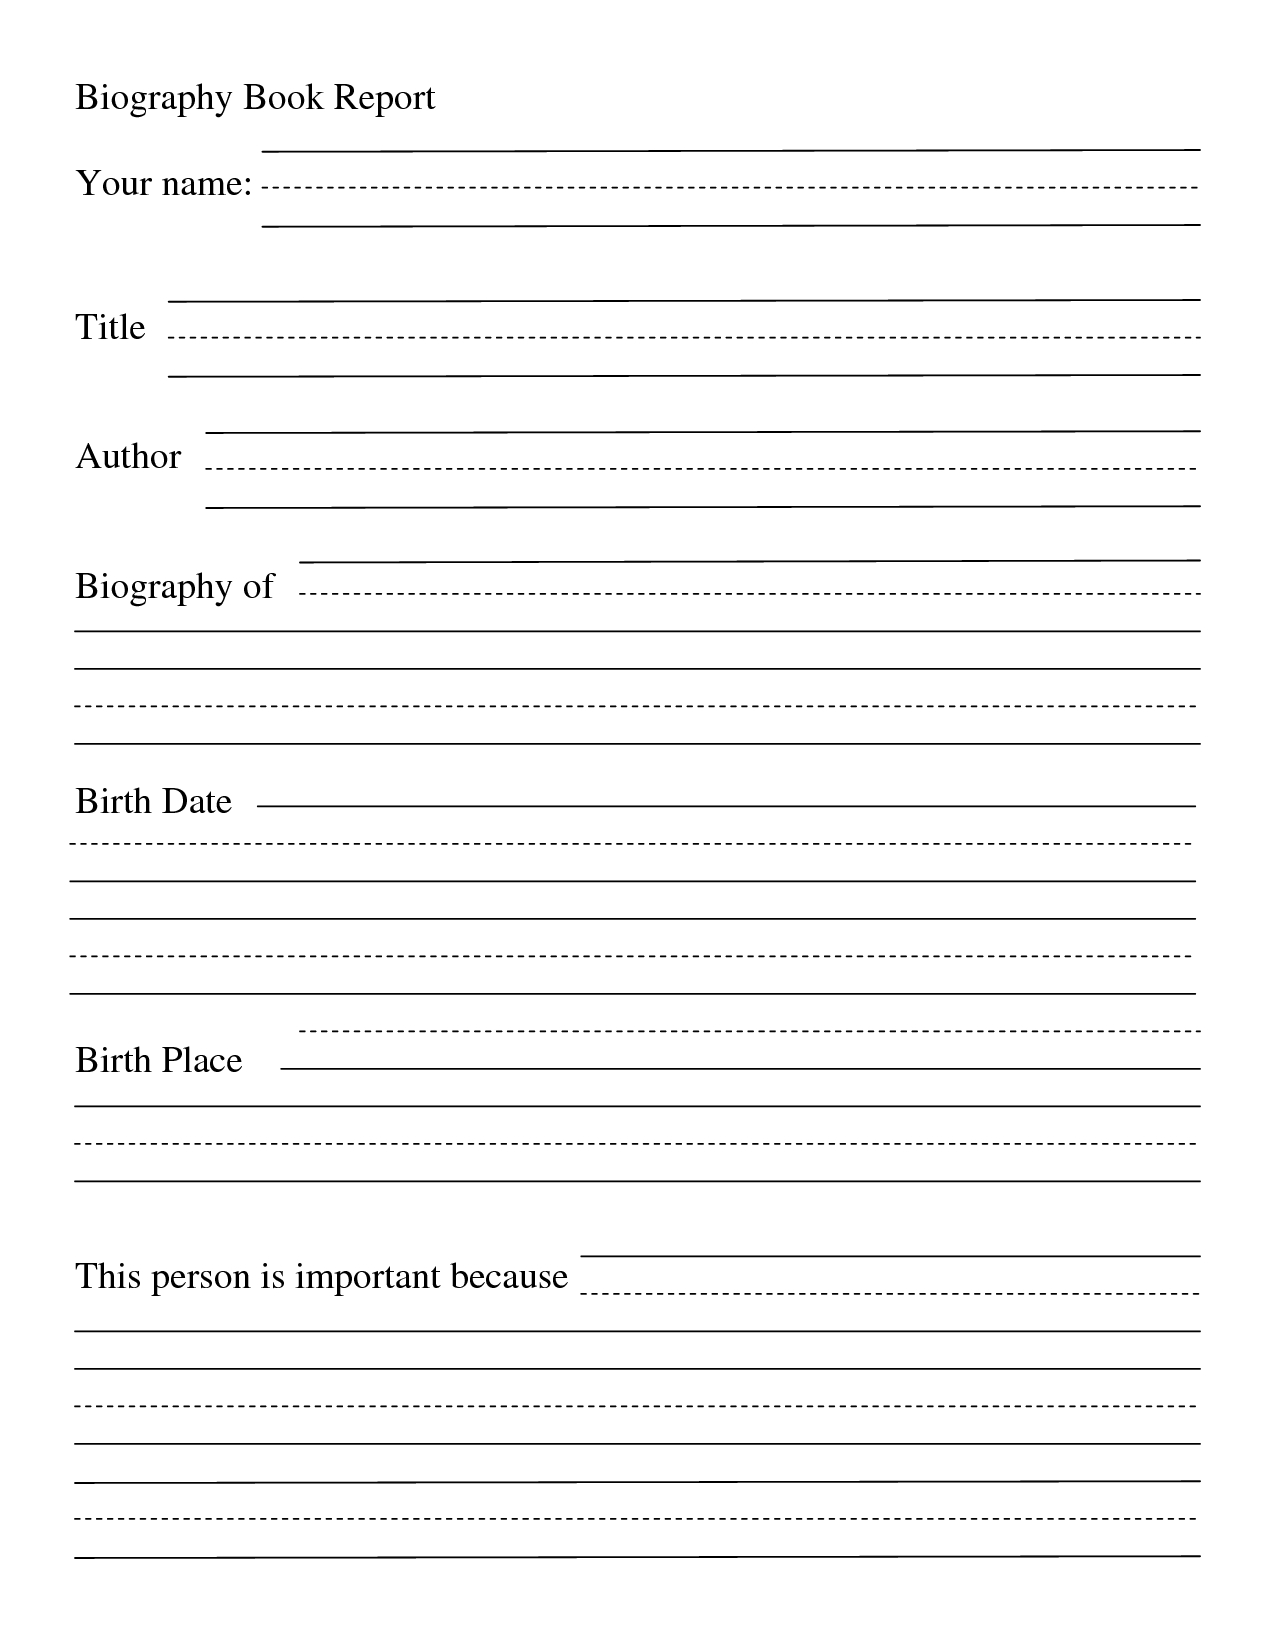 004 Biography Book Report Template Formidable Ideas Examples With High School Book Report Template